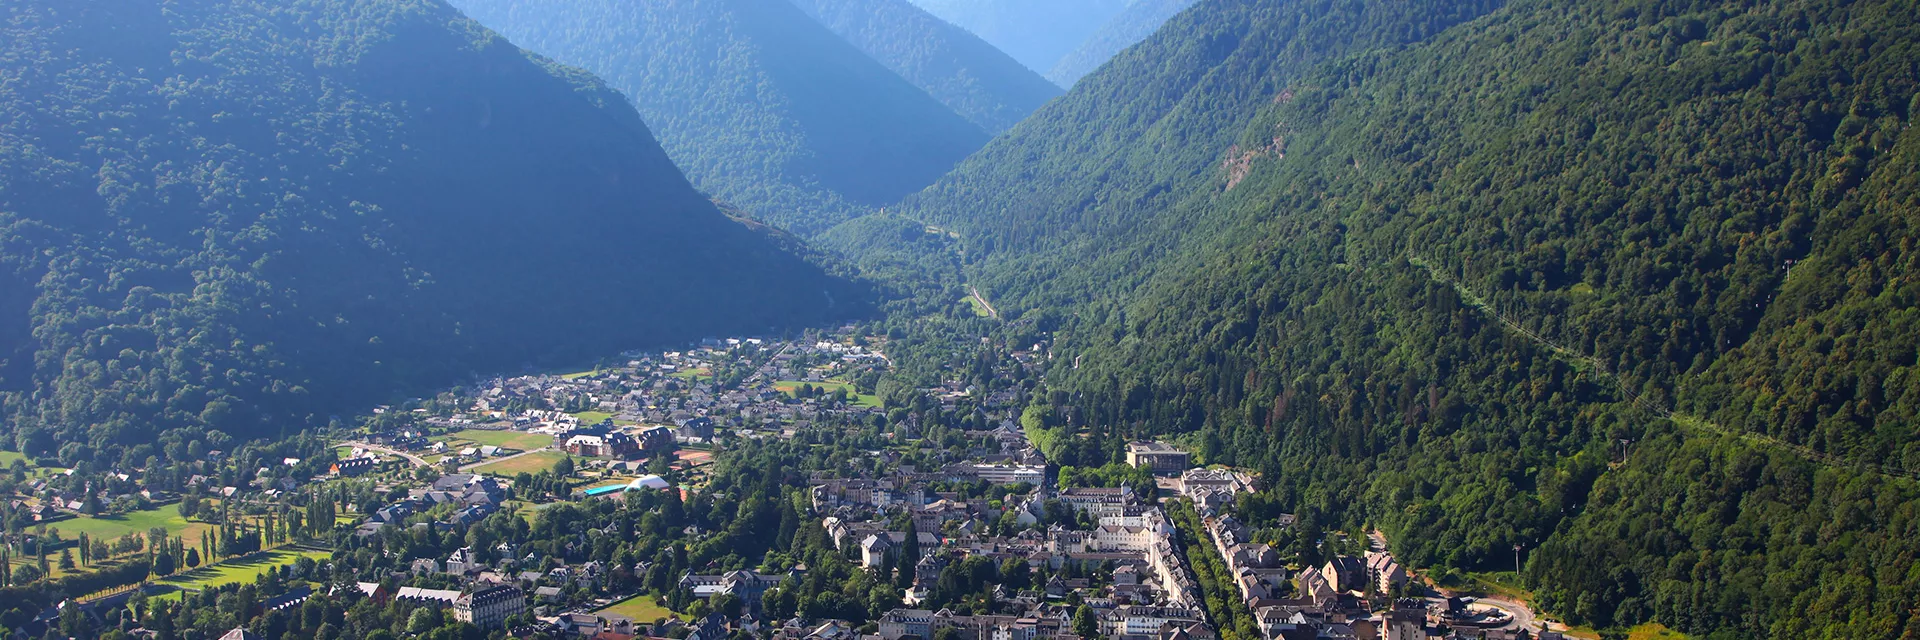 Holiday residence rental at Luchon - summer